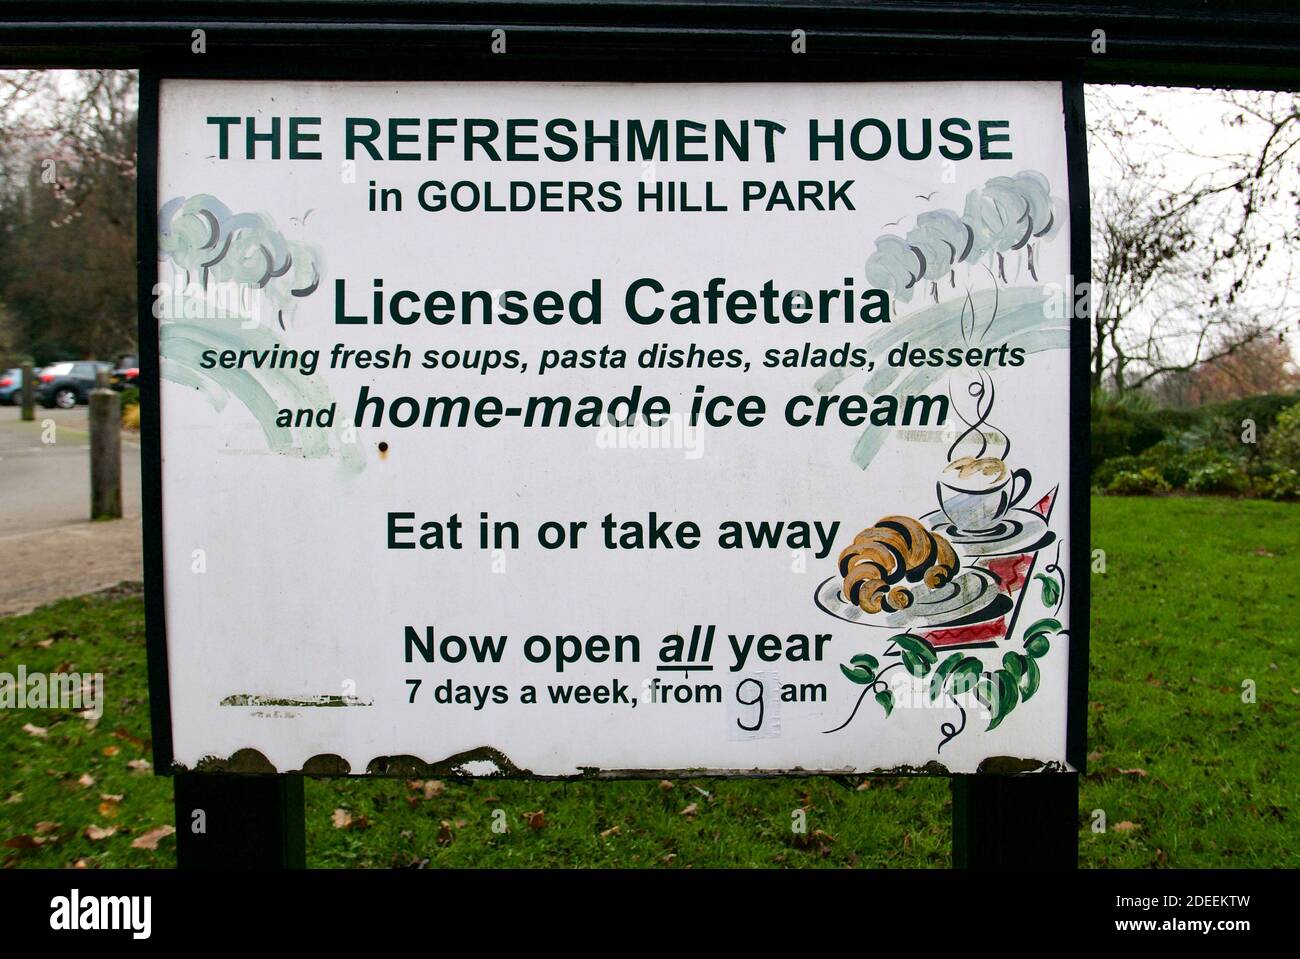 The Refreshment House sign in Golders Hill Park, Hampstead Heath, Golders Green, London advertising licensed cafeteria and home made ice cream. Stock Photo